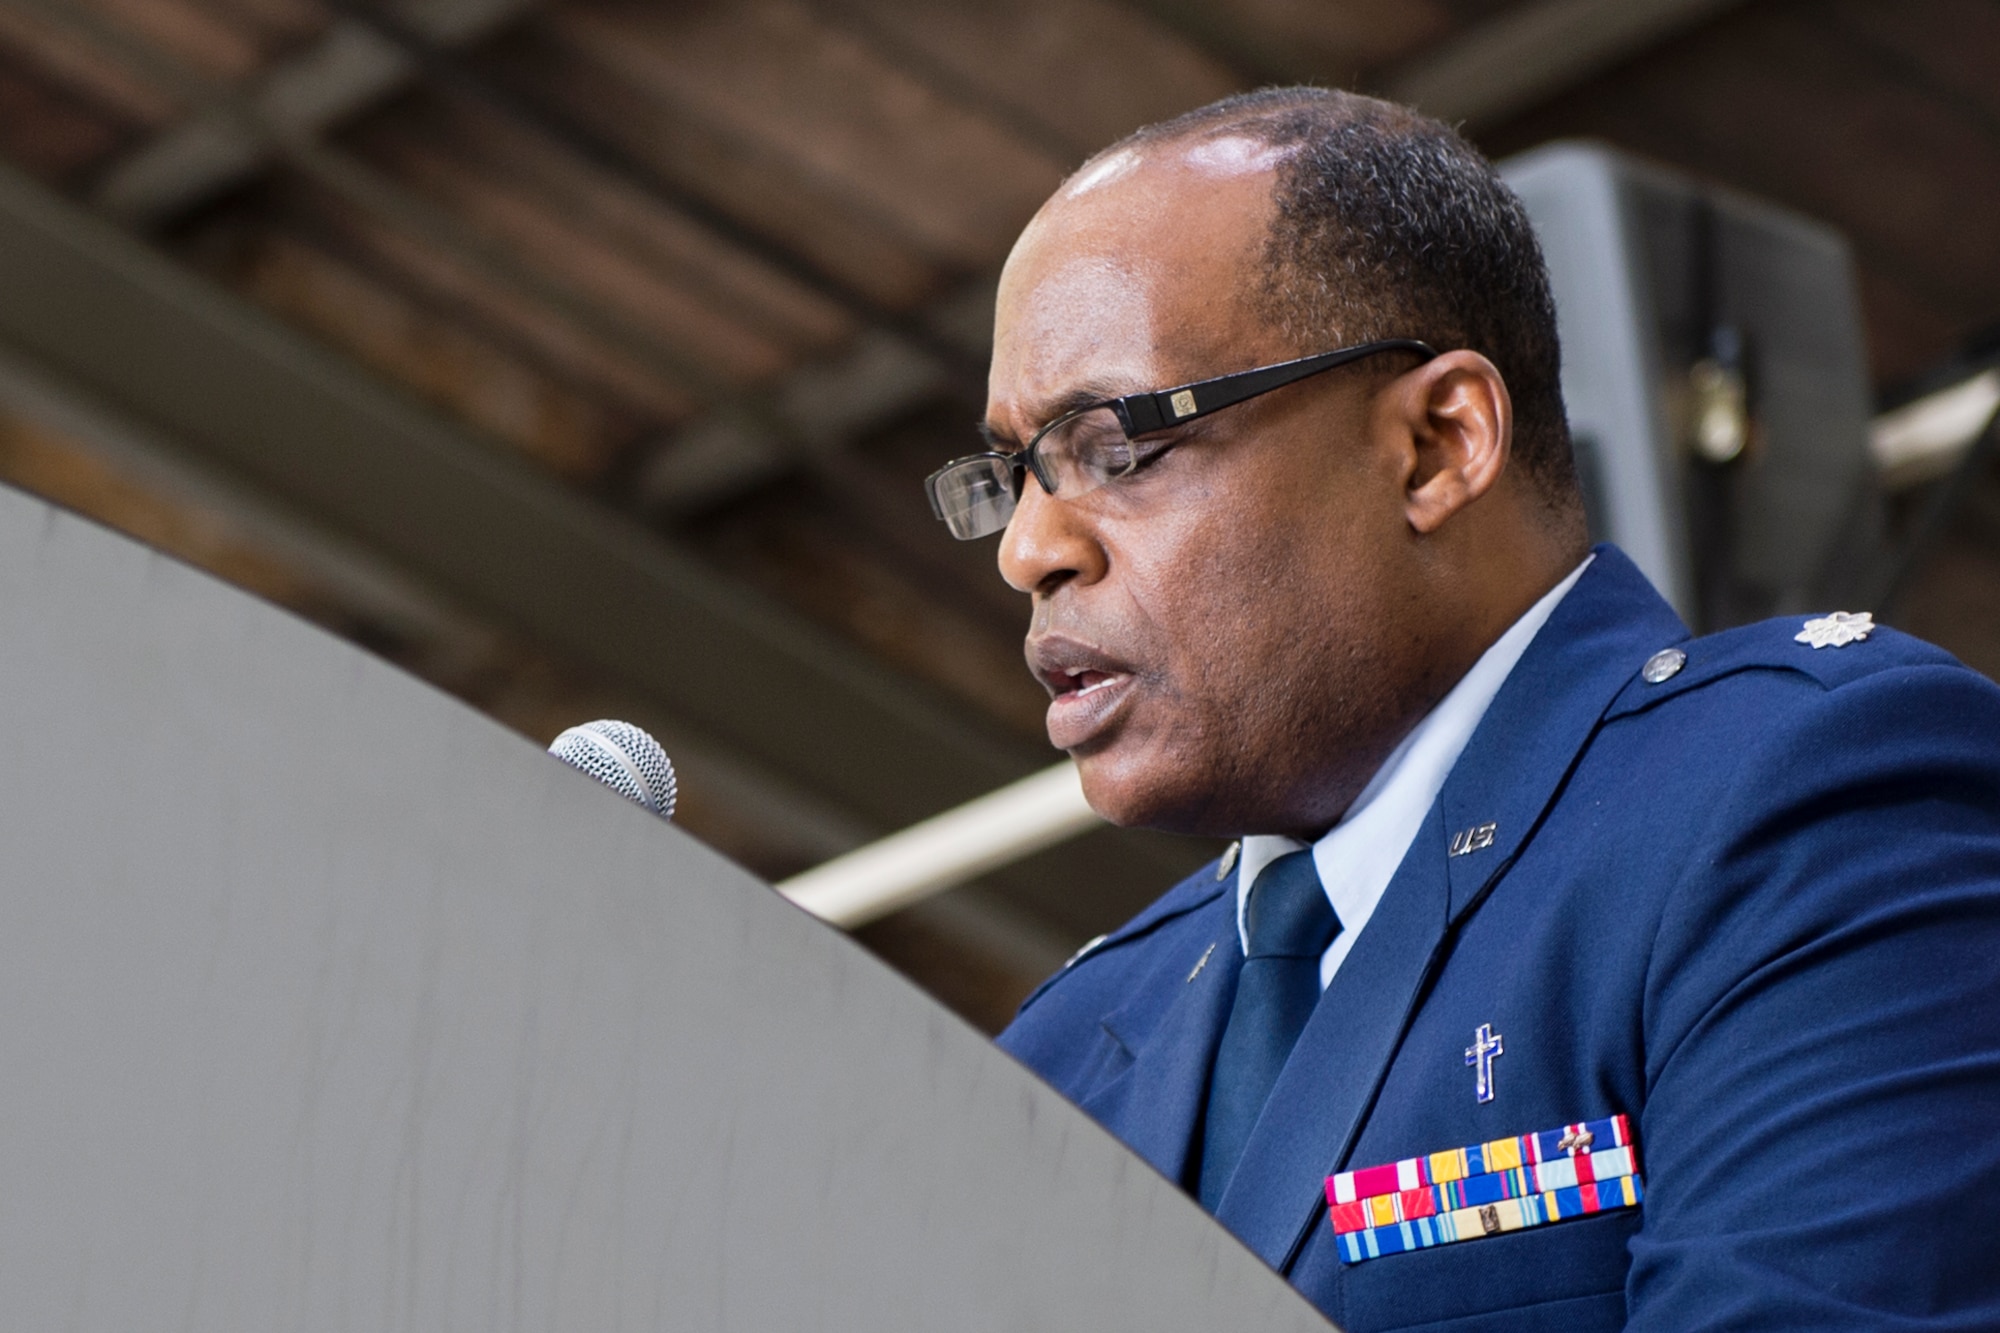 Chaplain (Lt. Col.) Obadiah Smith, Jr., 434th Air Refueling Wing chaplain, prays during a change of command ceremony at Grissom Air Reserve Base, Ind., July 9, 2016. As a religious leader of the military, Smith is responsible for tending to the religious and moral well-being of service members and their families. (U.S. Air Force photo/Tech. Sgt. Benjamin Mota)